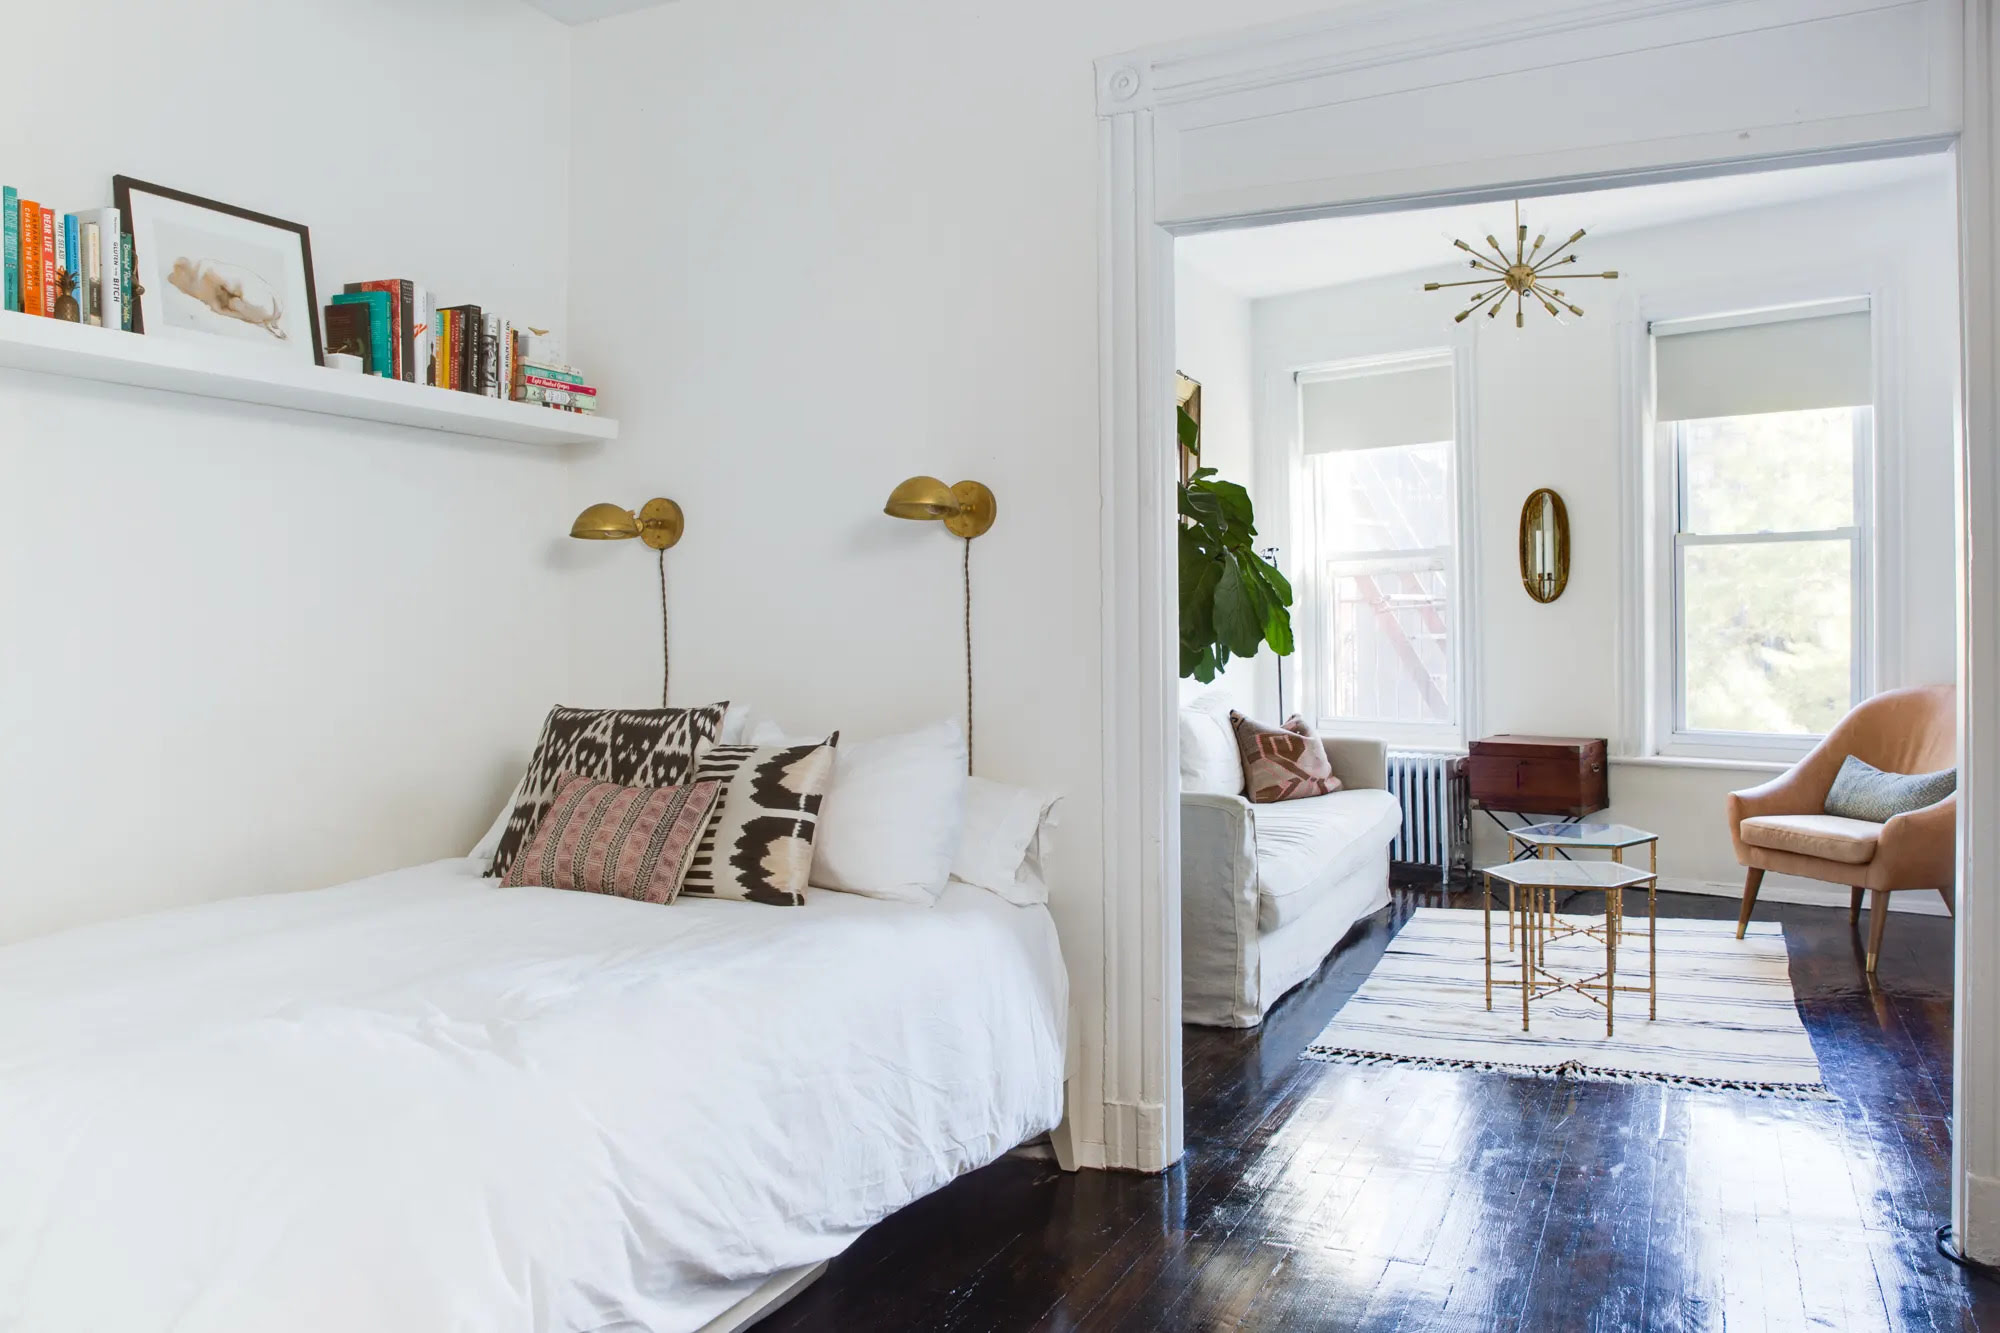 How To Make The Most Of A Small Space: 11 Space-Boosting Tips